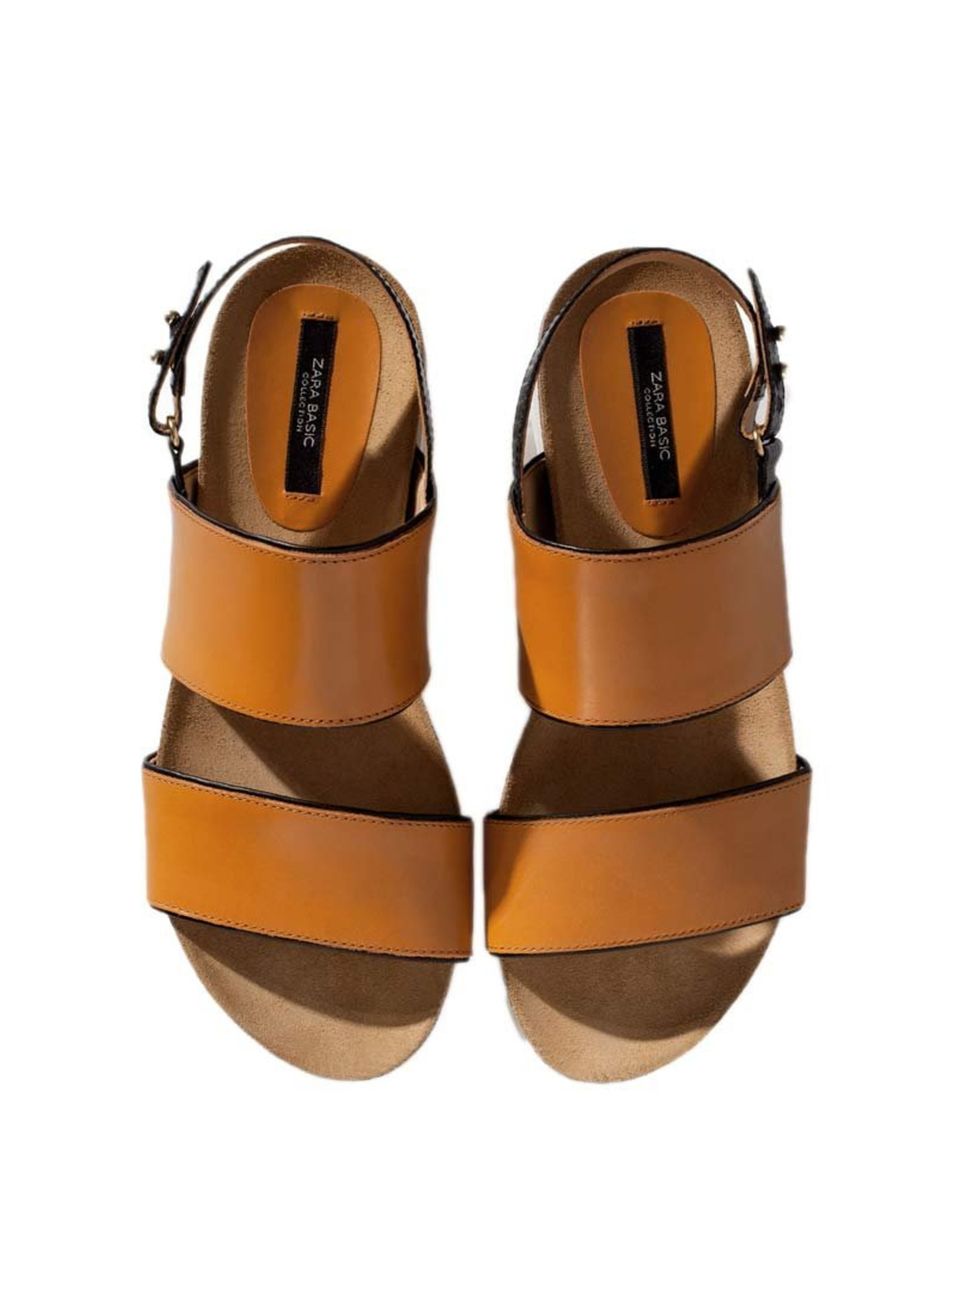 <p>Oh dear. Looks like it's time to put down the woolly socks and get a pedicure.</p><p><a href="http://www.zara.com/uk/en/woman/shoes/flat-leather-sandal-with-track-sole-c358009p1832550.html">Zara</a> sandals, £49.99</p>